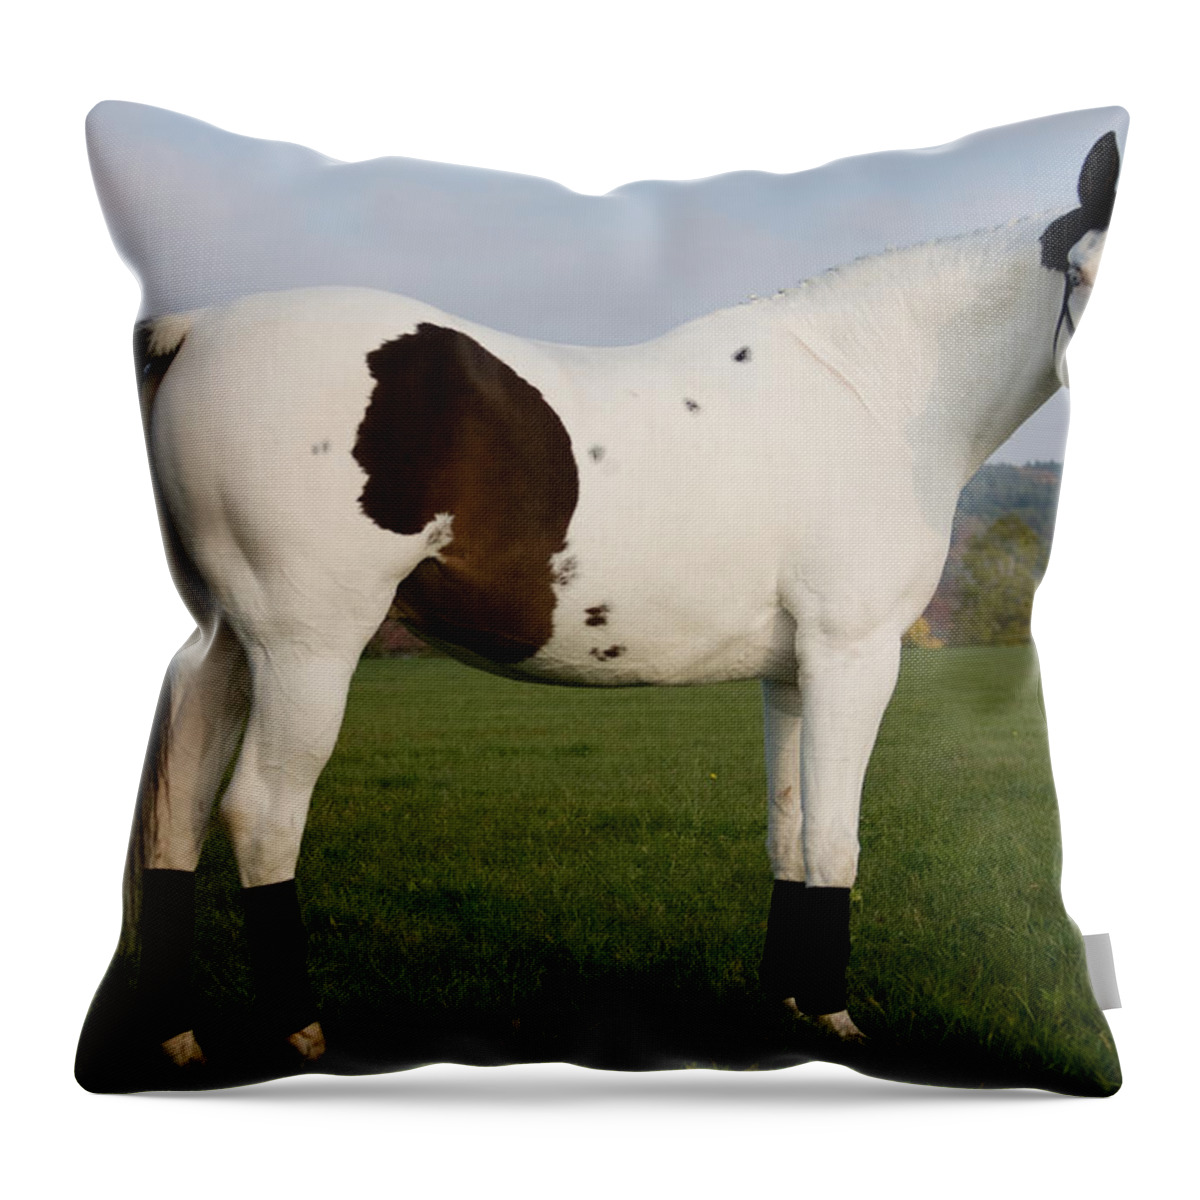 Eyes Throw Pillow featuring the photograph Side View by Ralf Kaiser